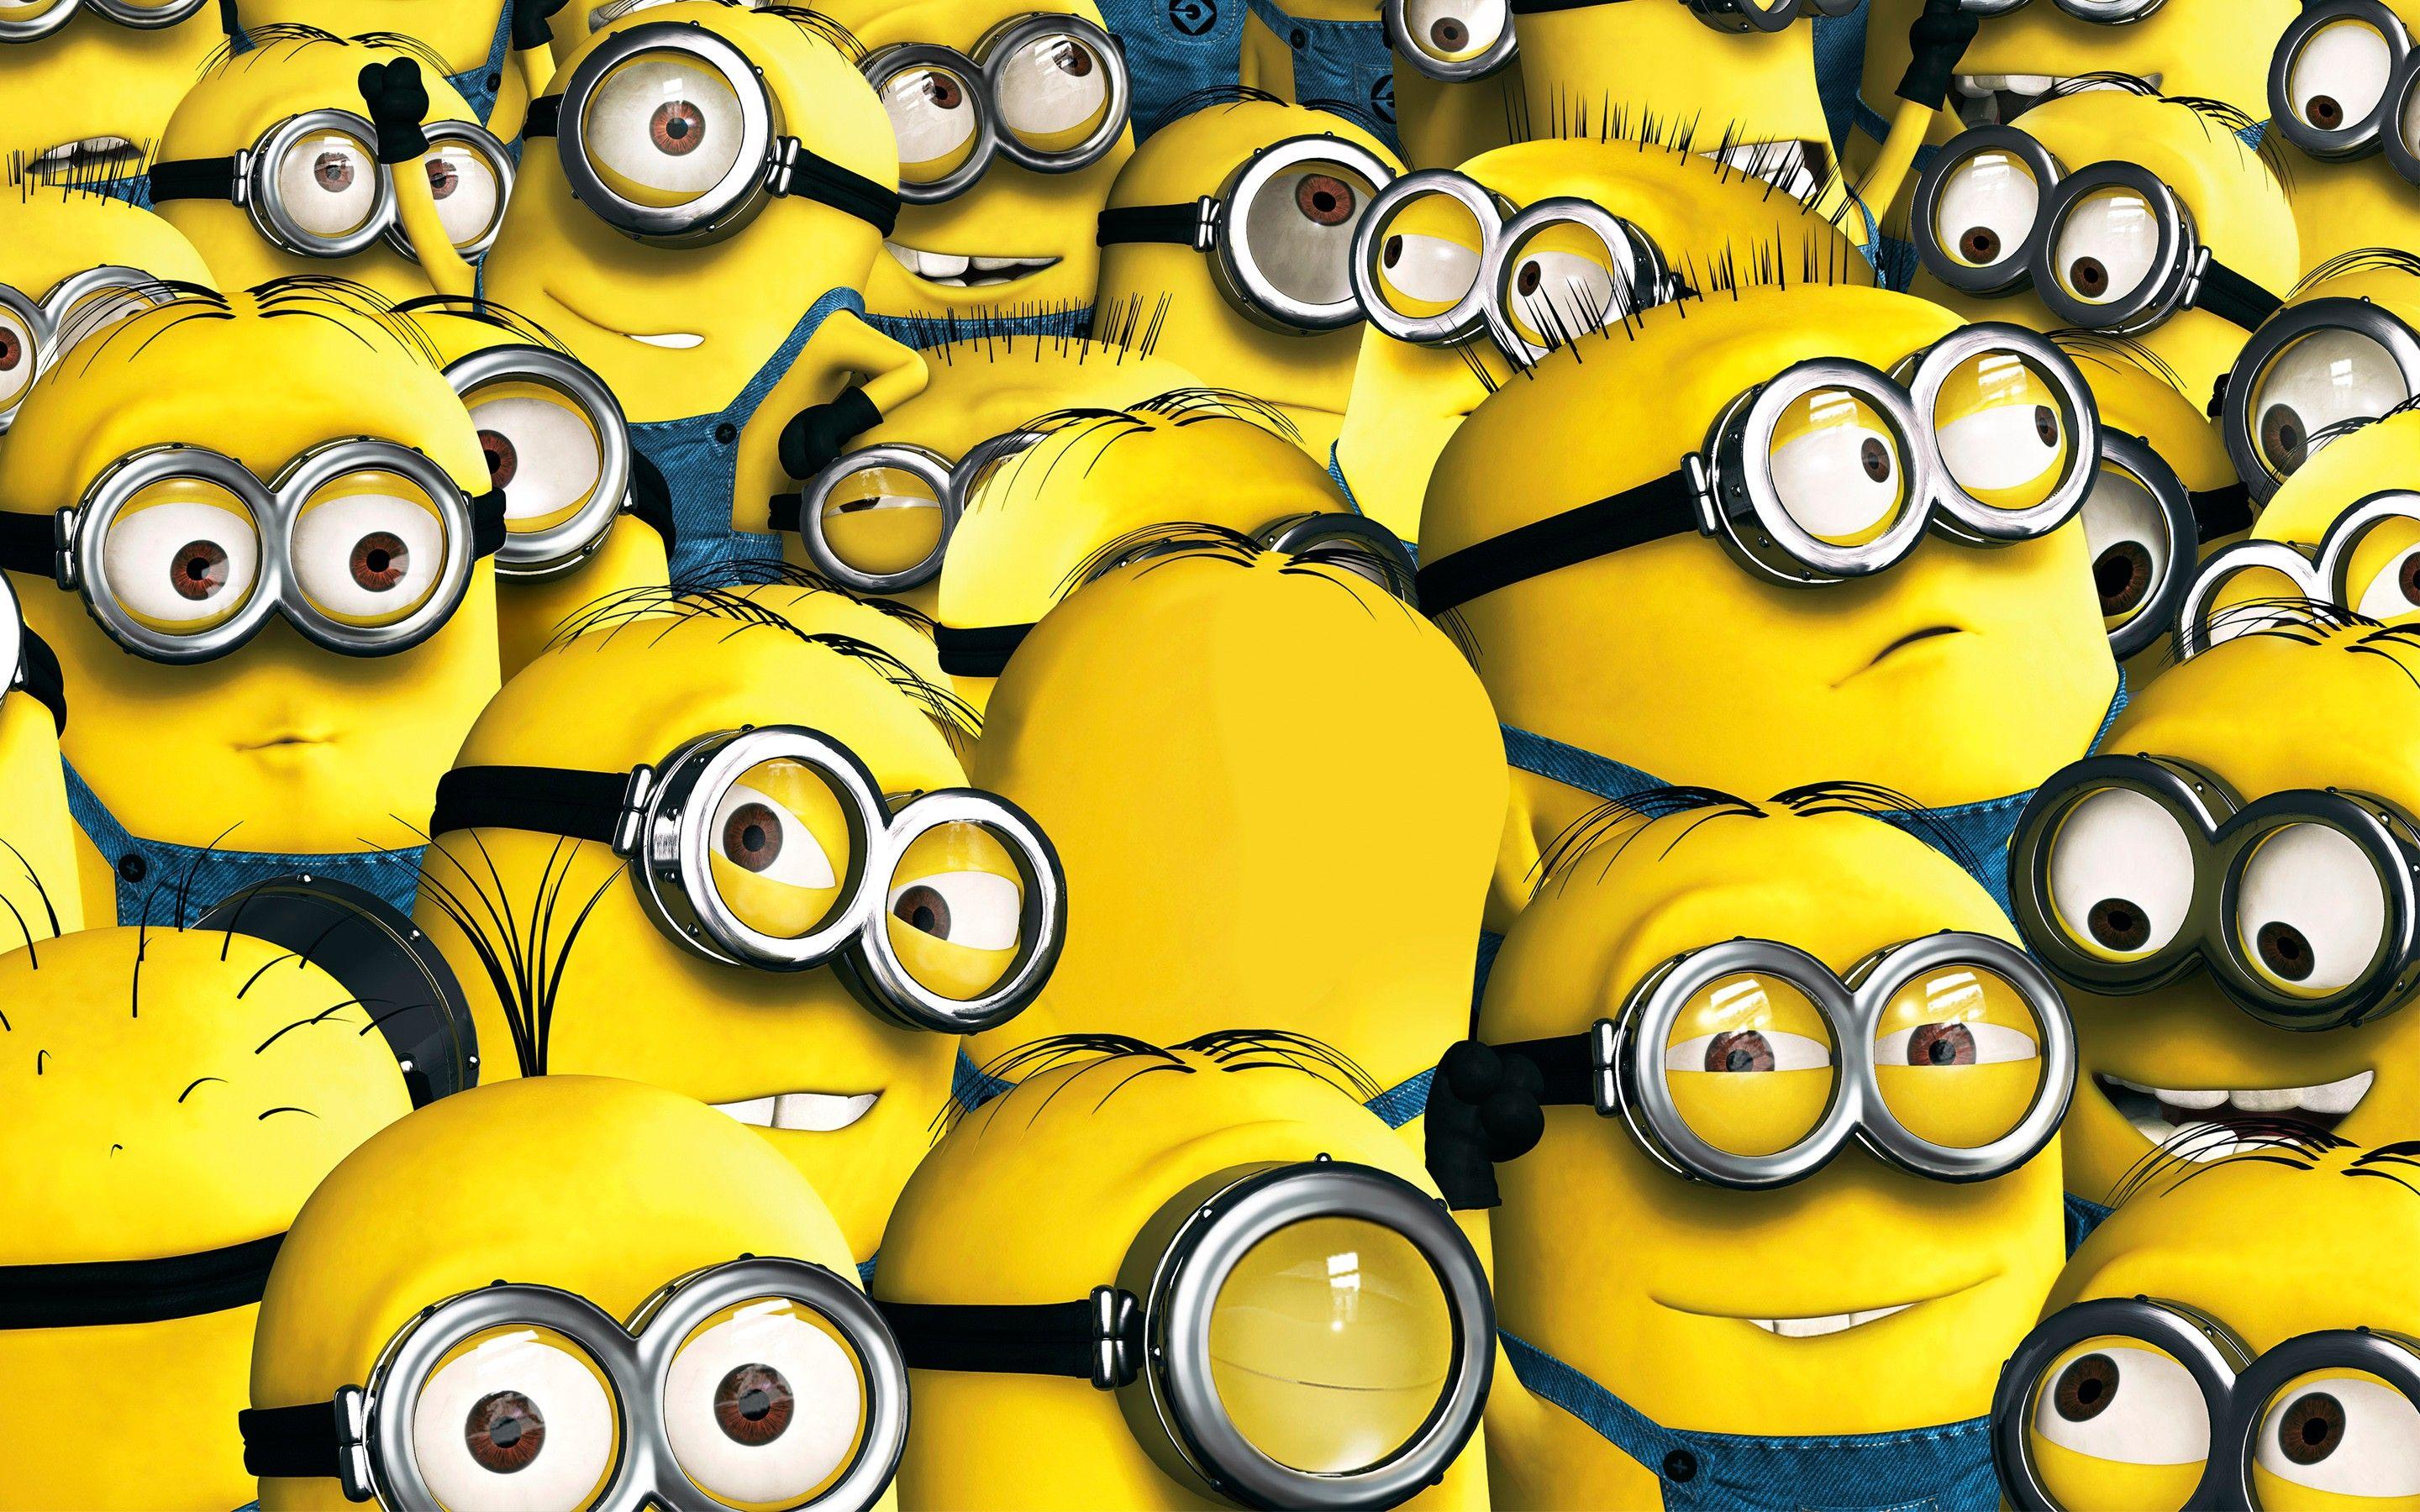 Minions Wallpapers  Top 35 Best Minions Wallpapers Download